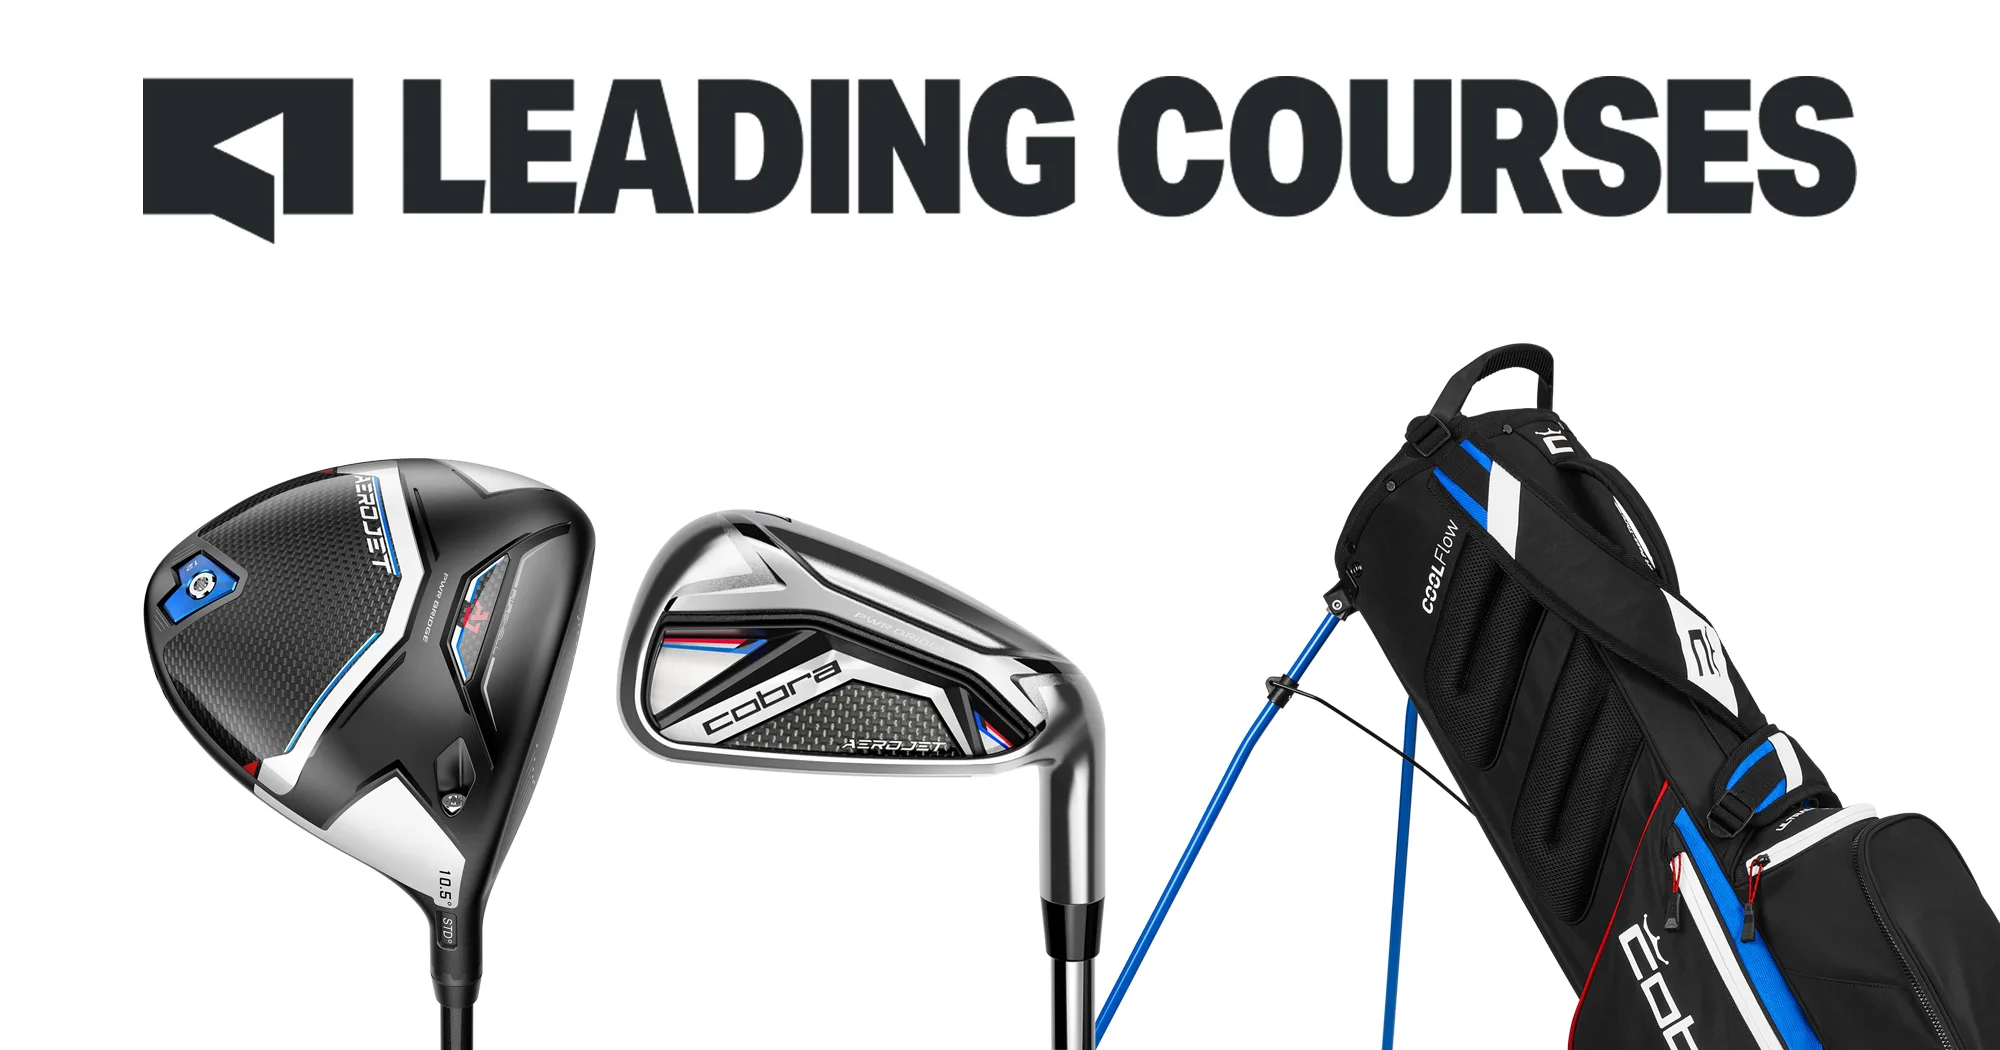 WIN! Cobra clubs or stand bag courtesy of Leading Courses